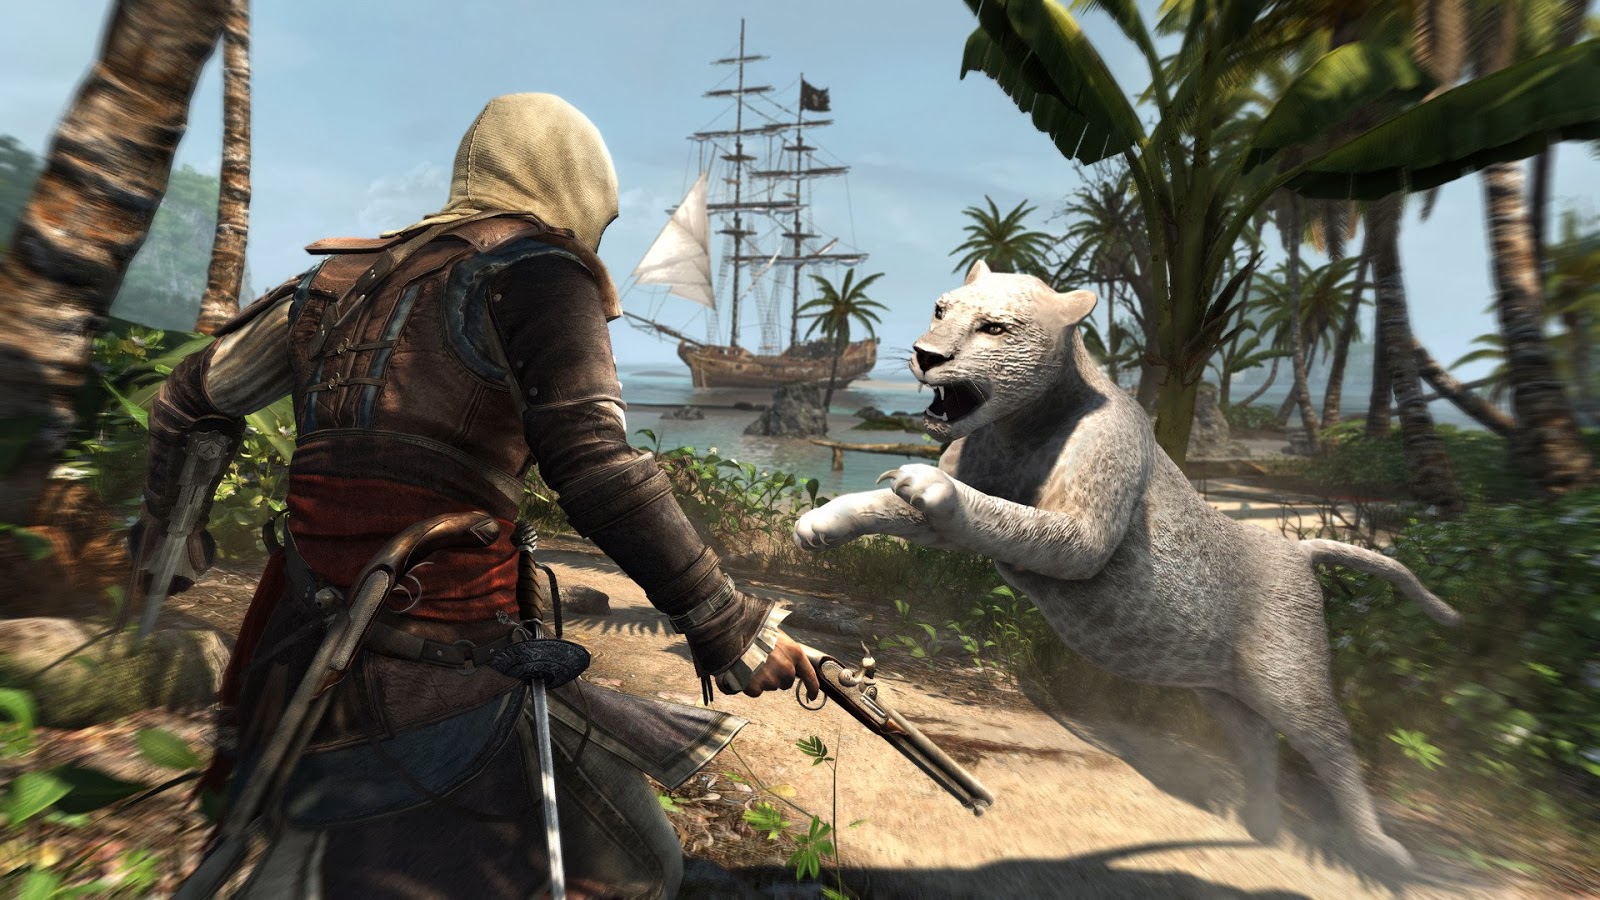 Free Download PC Games Full Crack: Assassin's Creed IV 